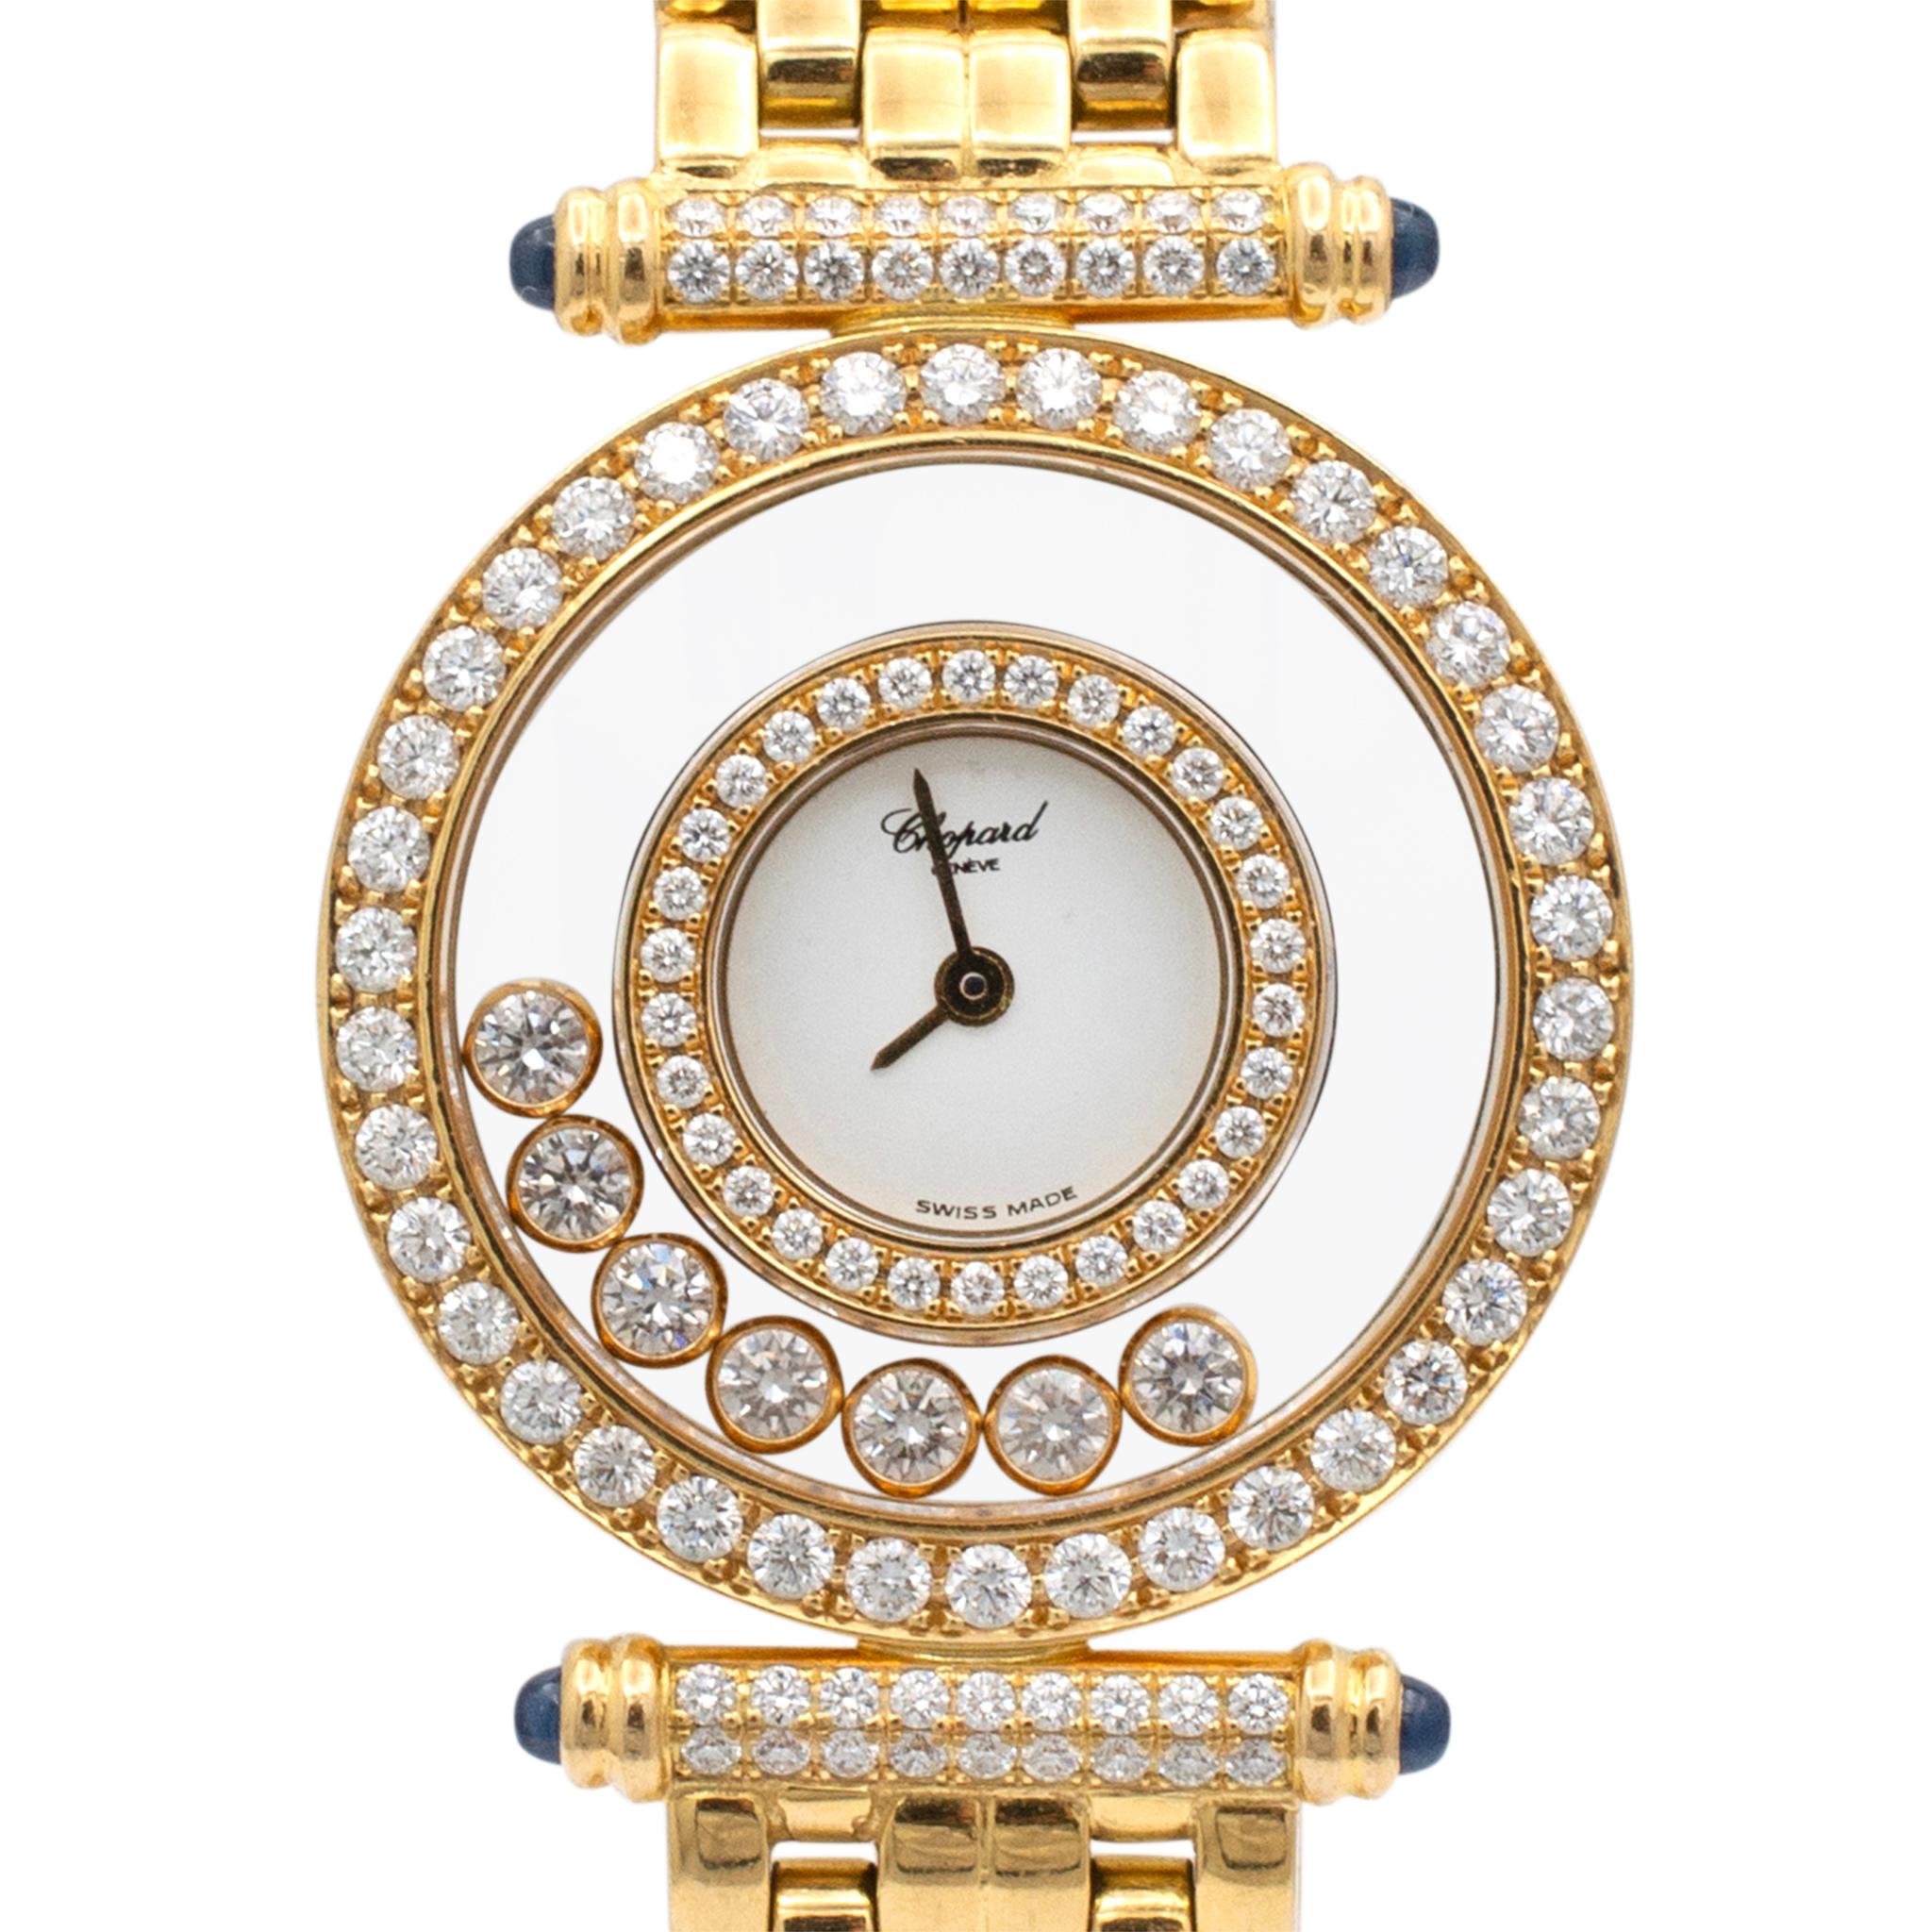 Brand: Chopard

Gender: Ladies

Metal Type: 18K Yellow Gold

Weight: 59.70 grams

Ladies 18K yellow gold diamond Chopard Swiss made watch. Engraved with 